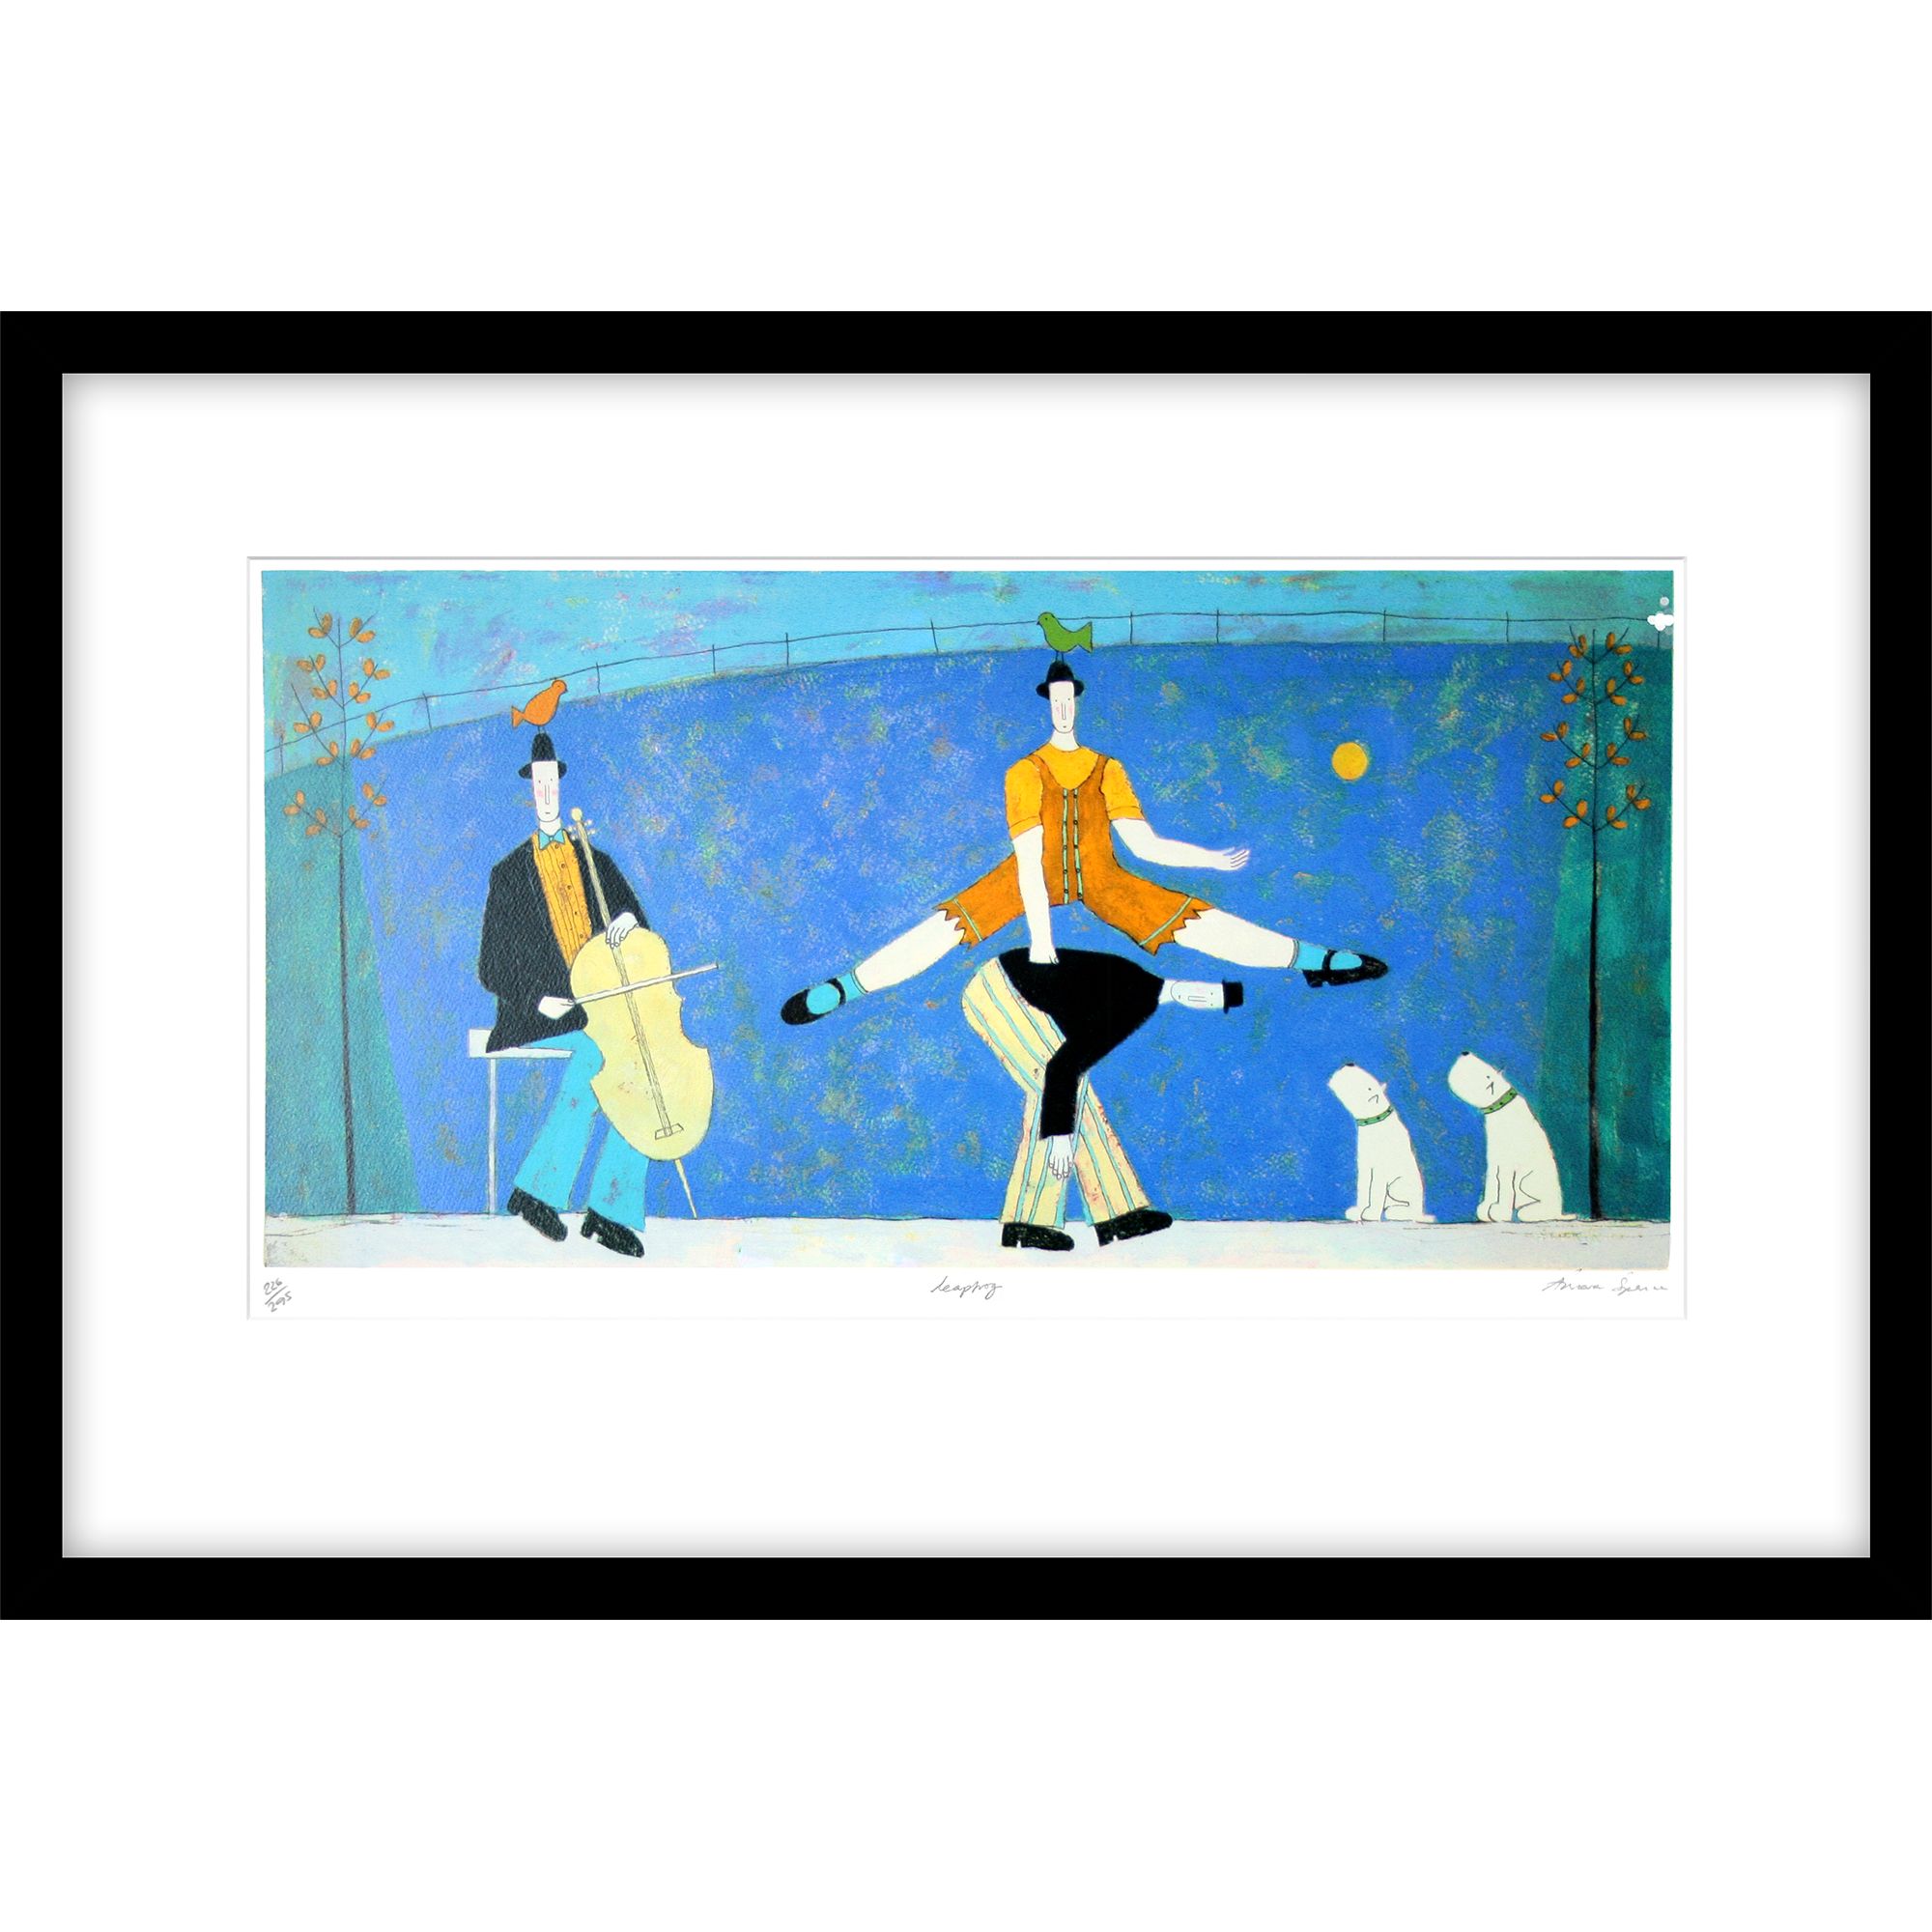 John Lewis Annora Spence - Leap Frog Limited Edition Framed